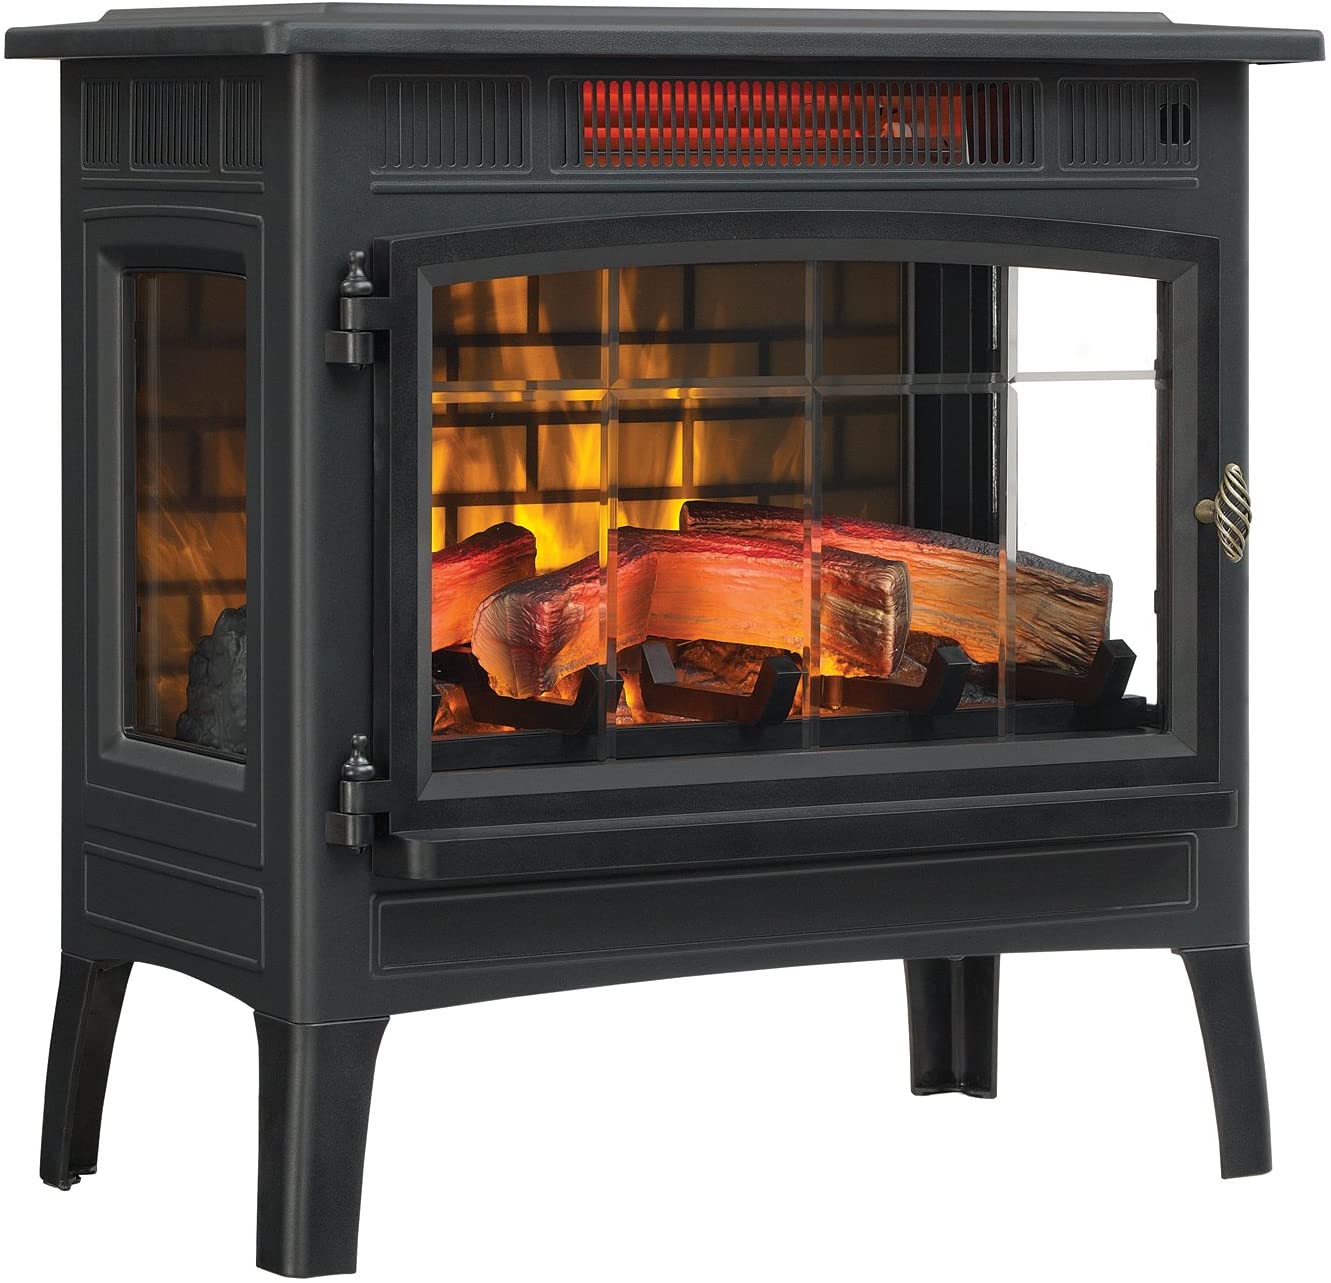 Duraflame 3D Infrared Electric Fireplace Stove with Remote Control